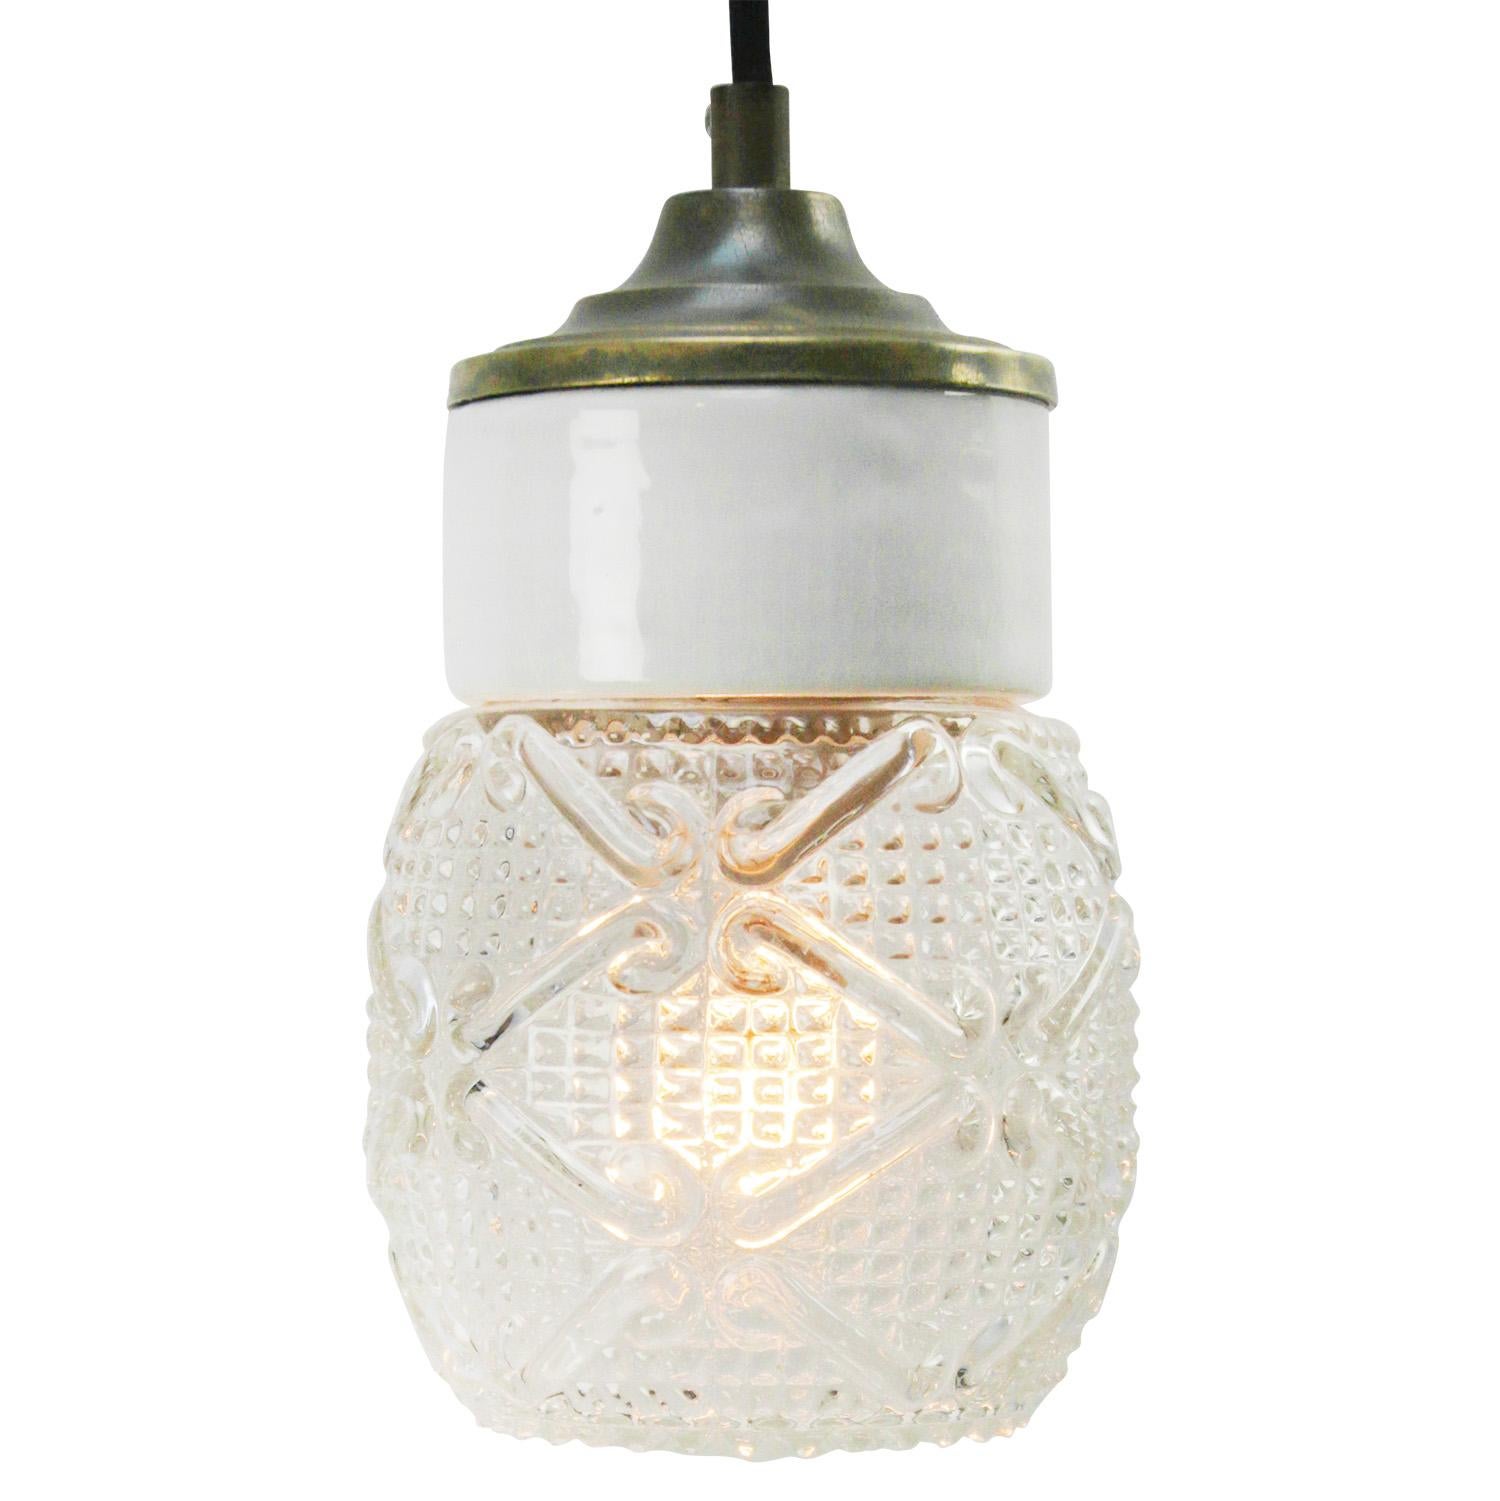 Porcelain industrial hanging lamp.
White porcelain, brass and clear striped glass.
2 conductors, no ground.

Weight: 1.56 kg / 3.4 lb

Priced per individual item. All lamps have been made suitable by international standards for incandescent